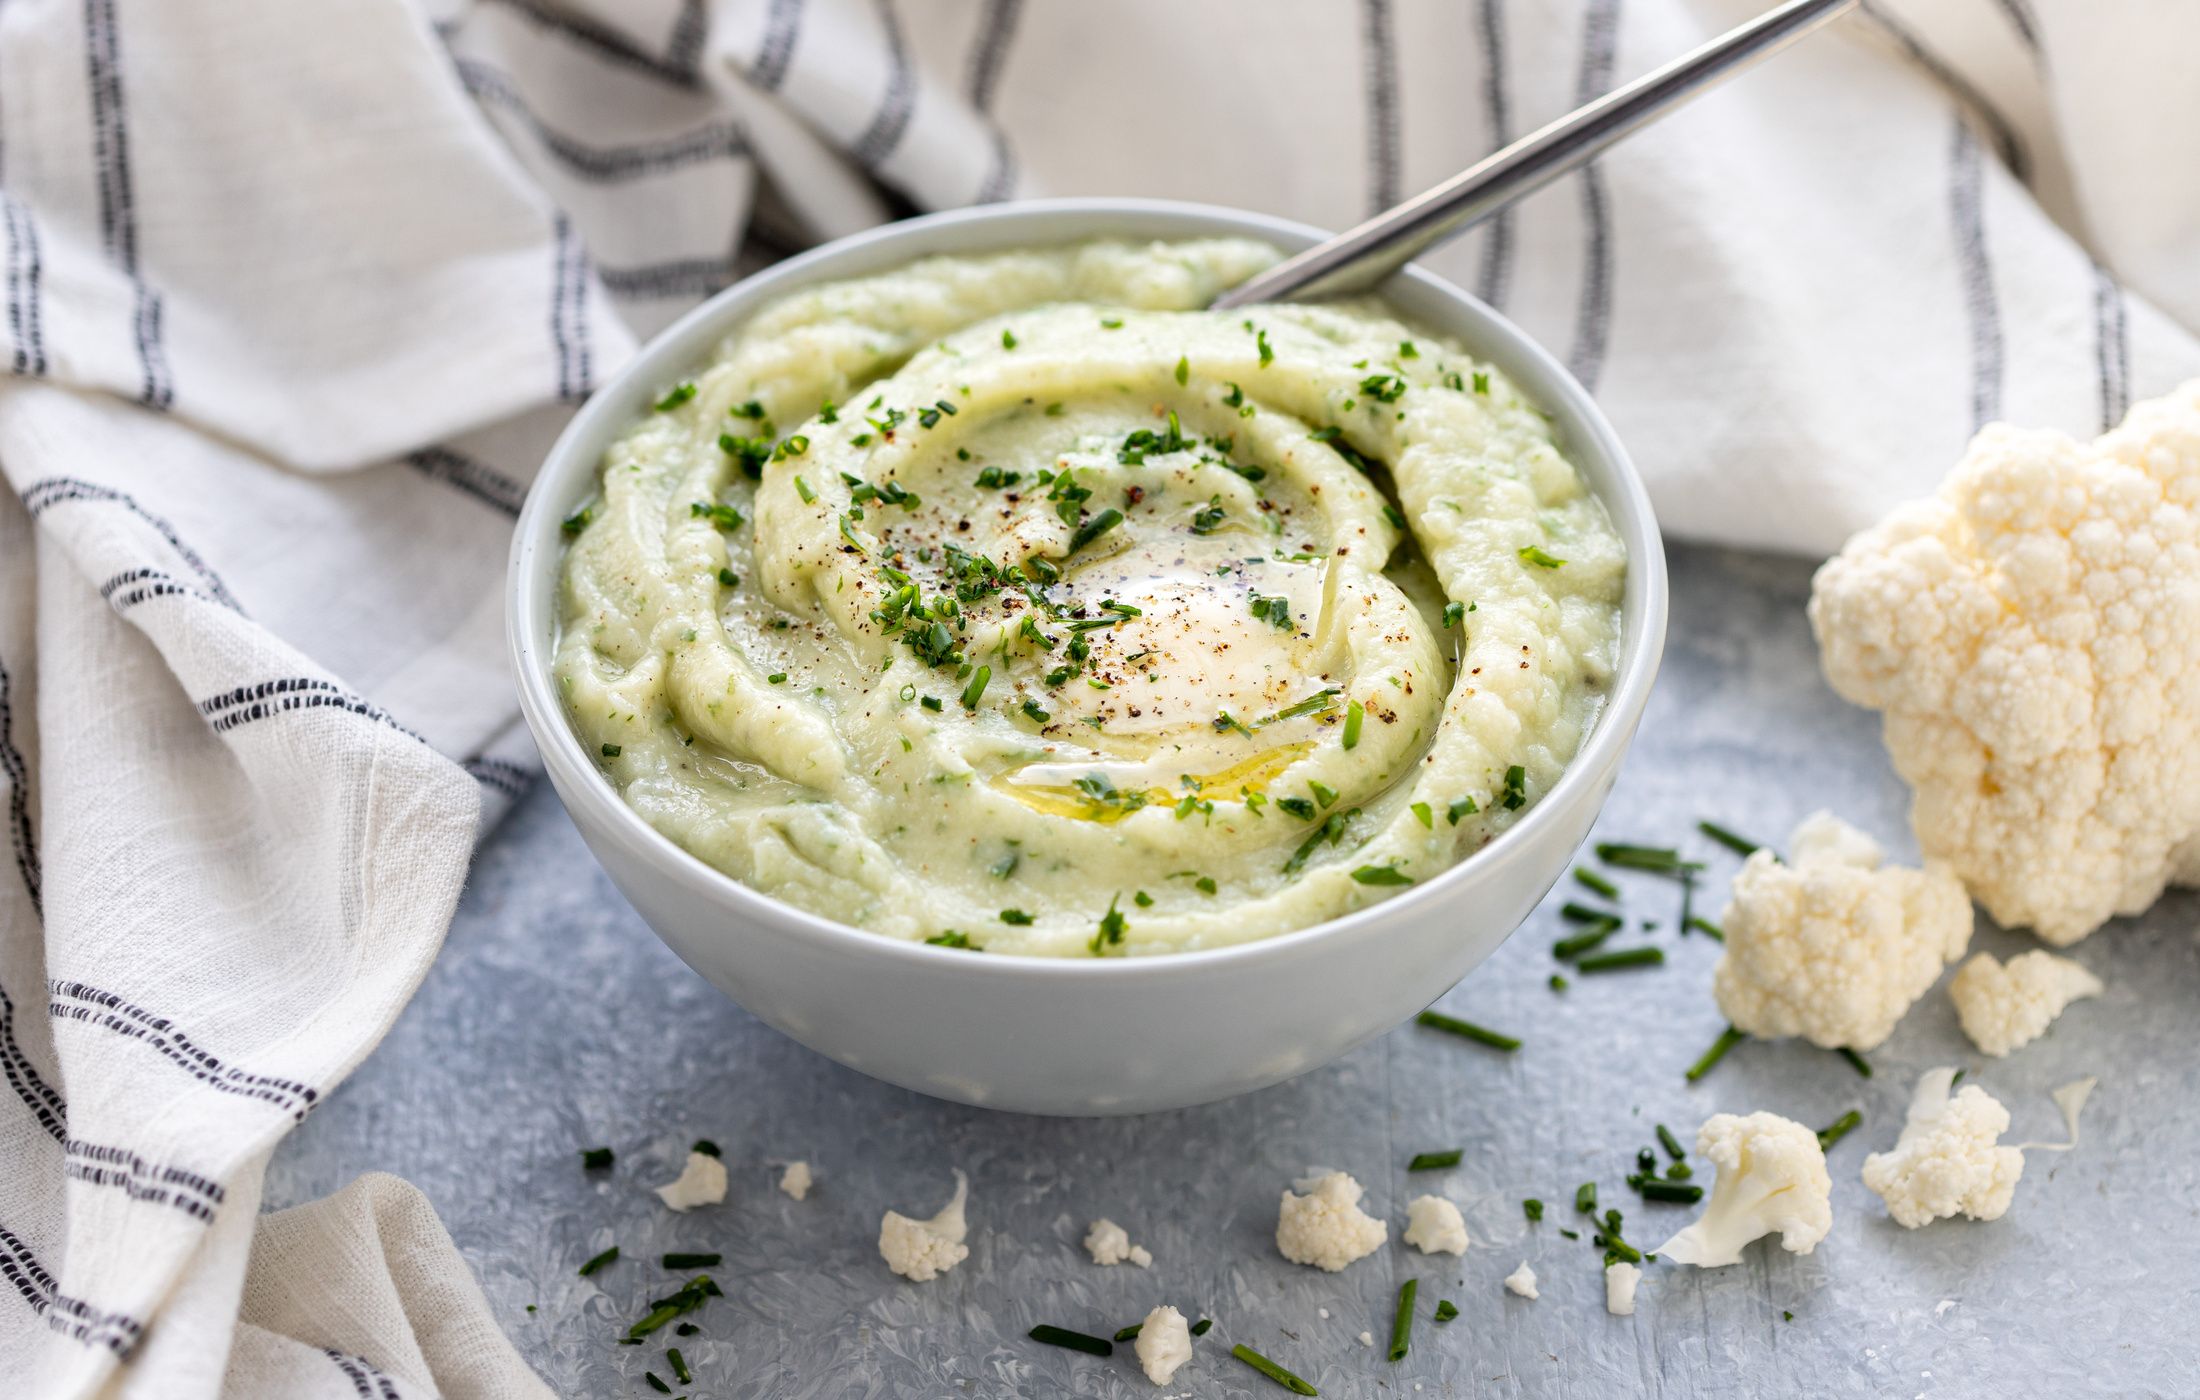 Keto Mashed Cauliflower with Chives